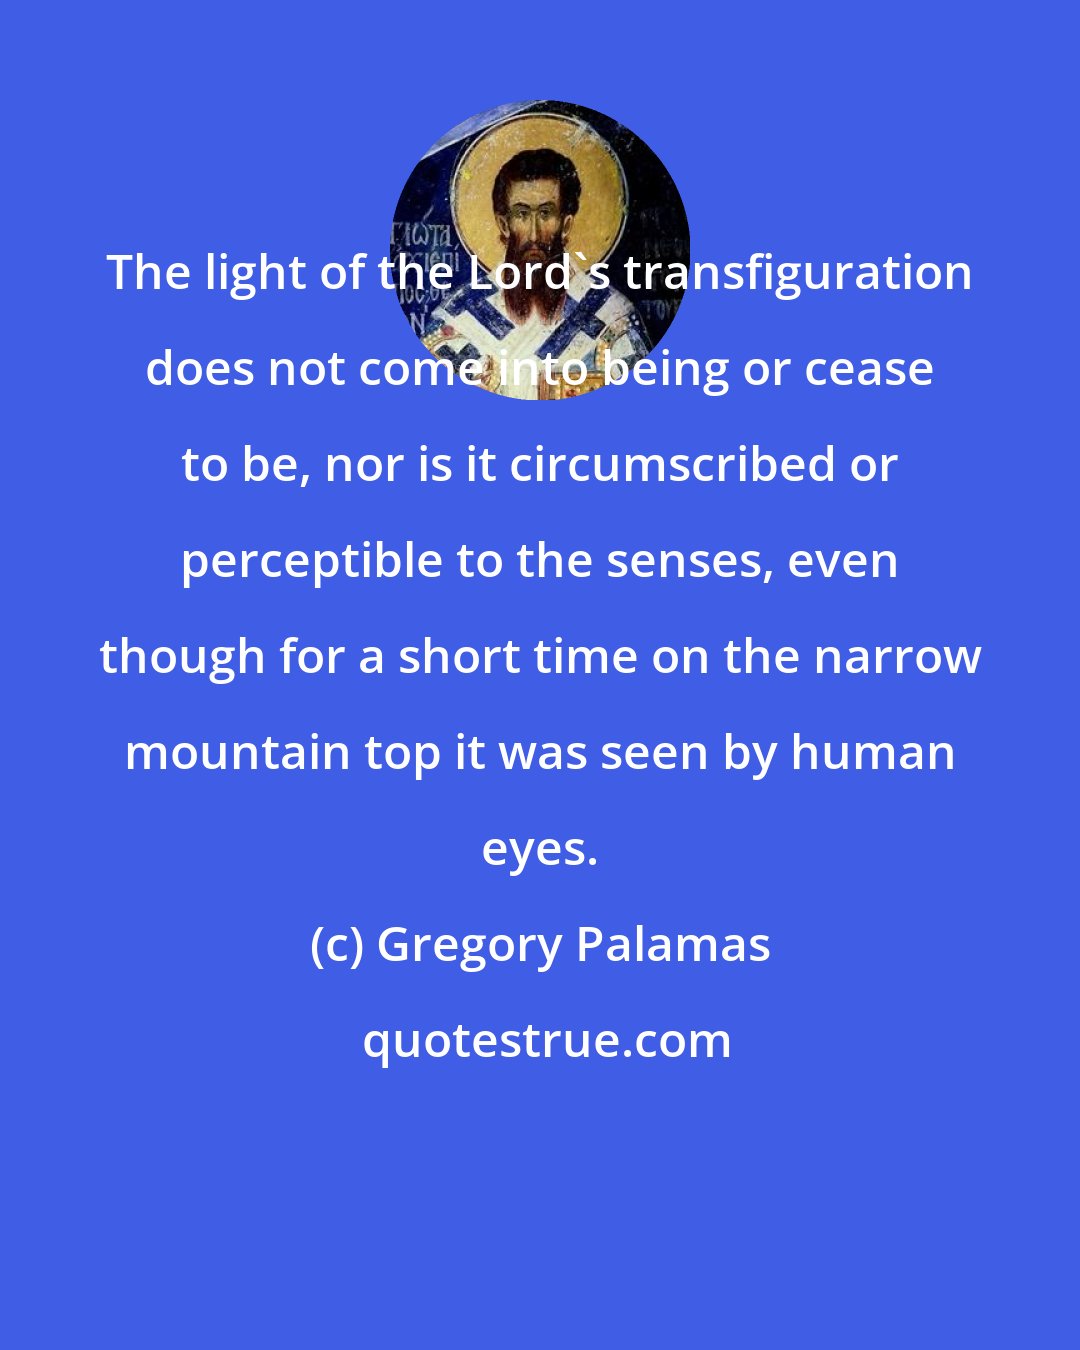 Gregory Palamas: The light of the Lord's transfiguration does not come into being or cease to be, nor is it circumscribed or perceptible to the senses, even though for a short time on the narrow mountain top it was seen by human eyes.